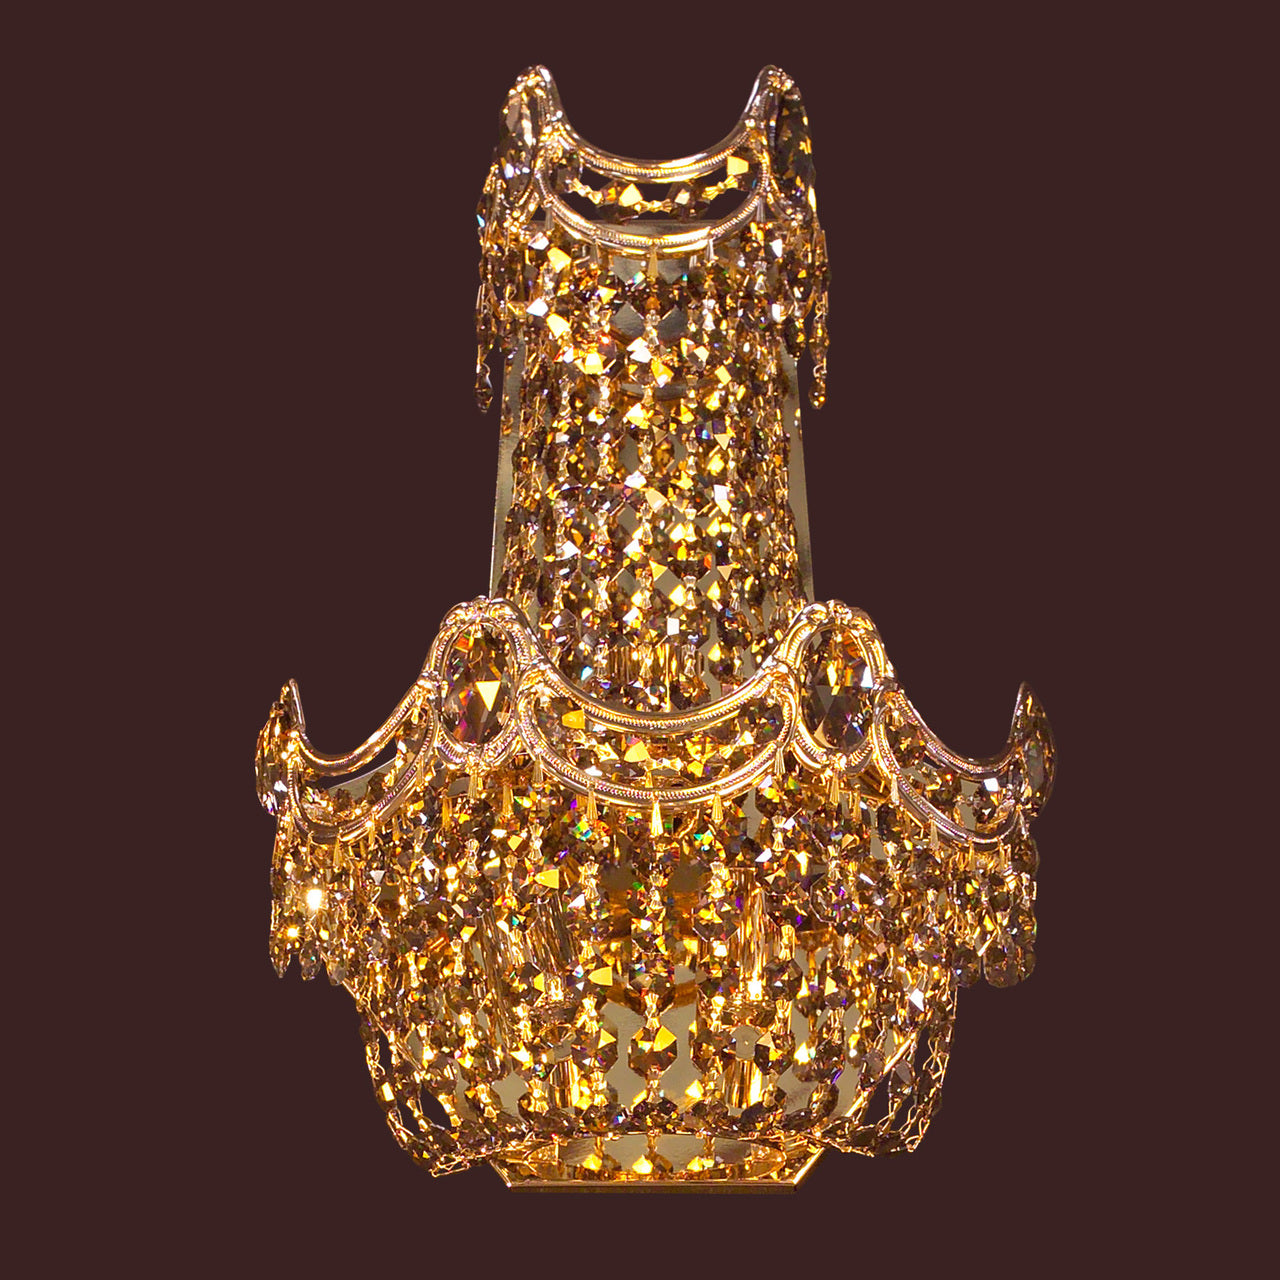 Classic Lighting 1810 RB CP Regency Crystal Wall Sconce in Roman Bronze (Imported from Spain)